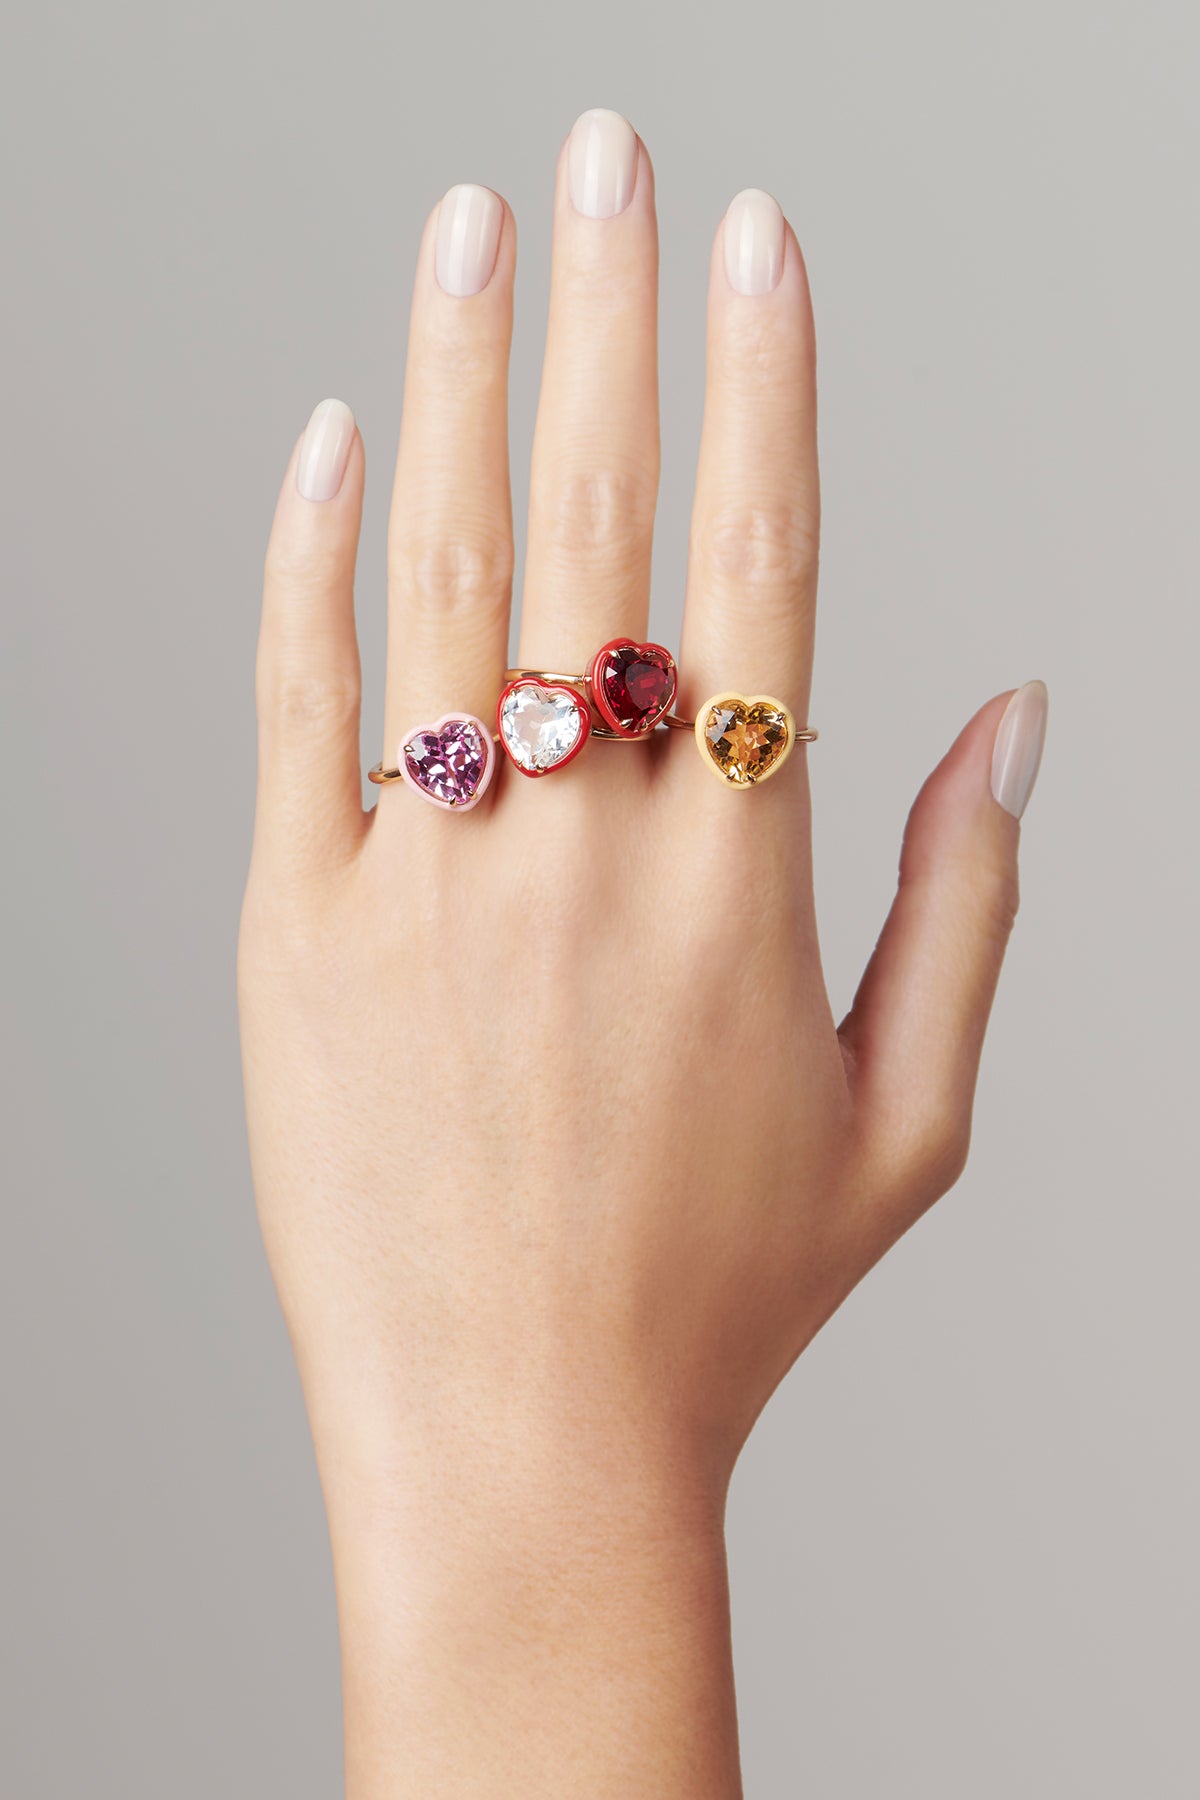 Louis Vuitton Heart Inclusion Ring - Red, Gold-Tone Metal Cocktail